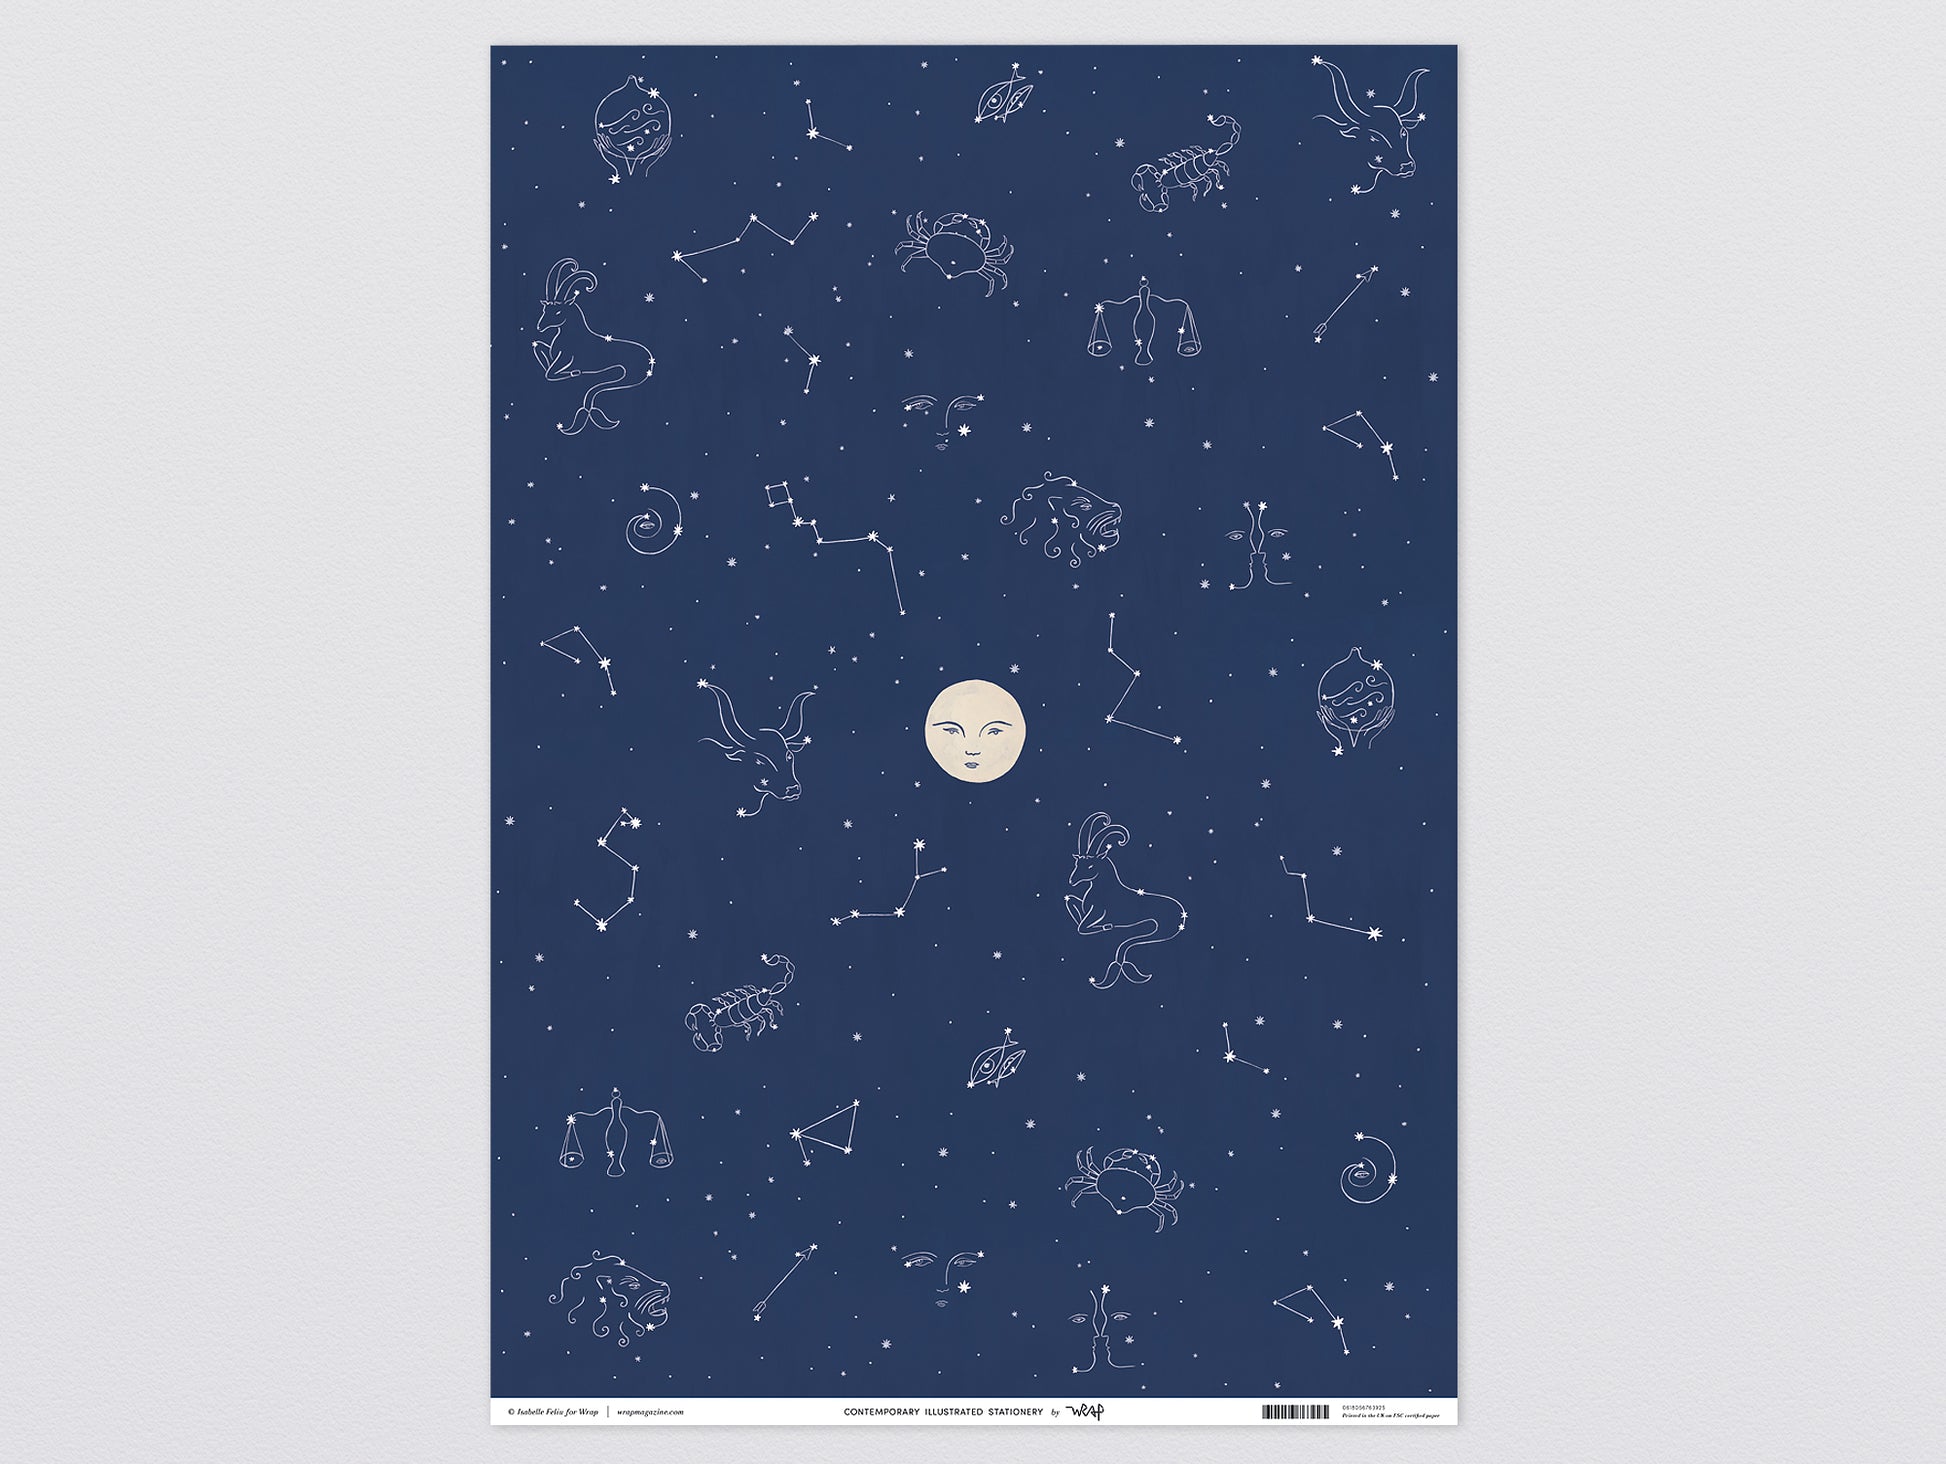 Starry Night Wrapping Paper by Wrap Stationery